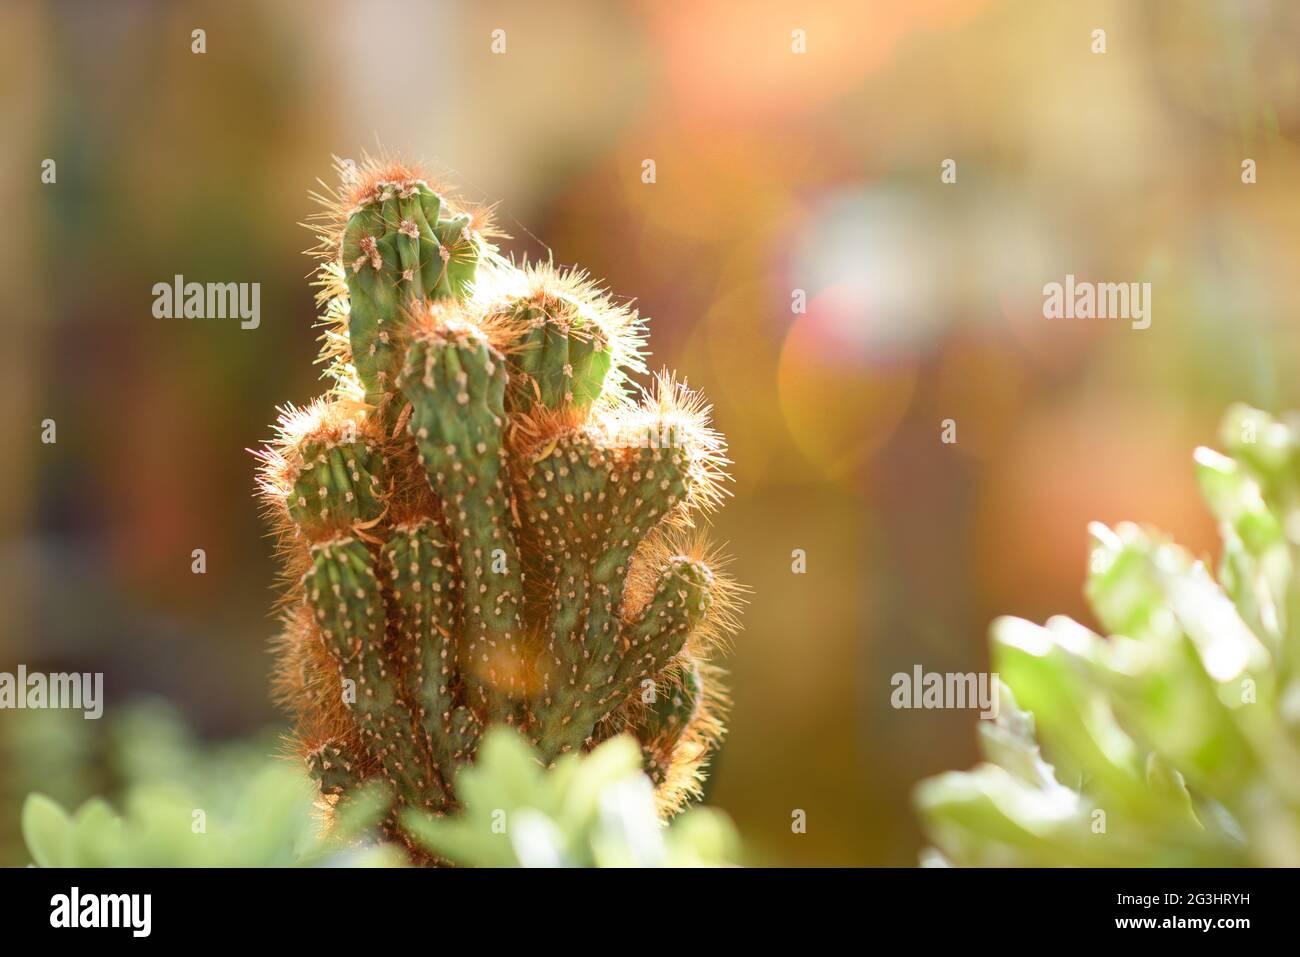 Cactus in flower pot outdoors at sunset. Selective focus. Stock Photo